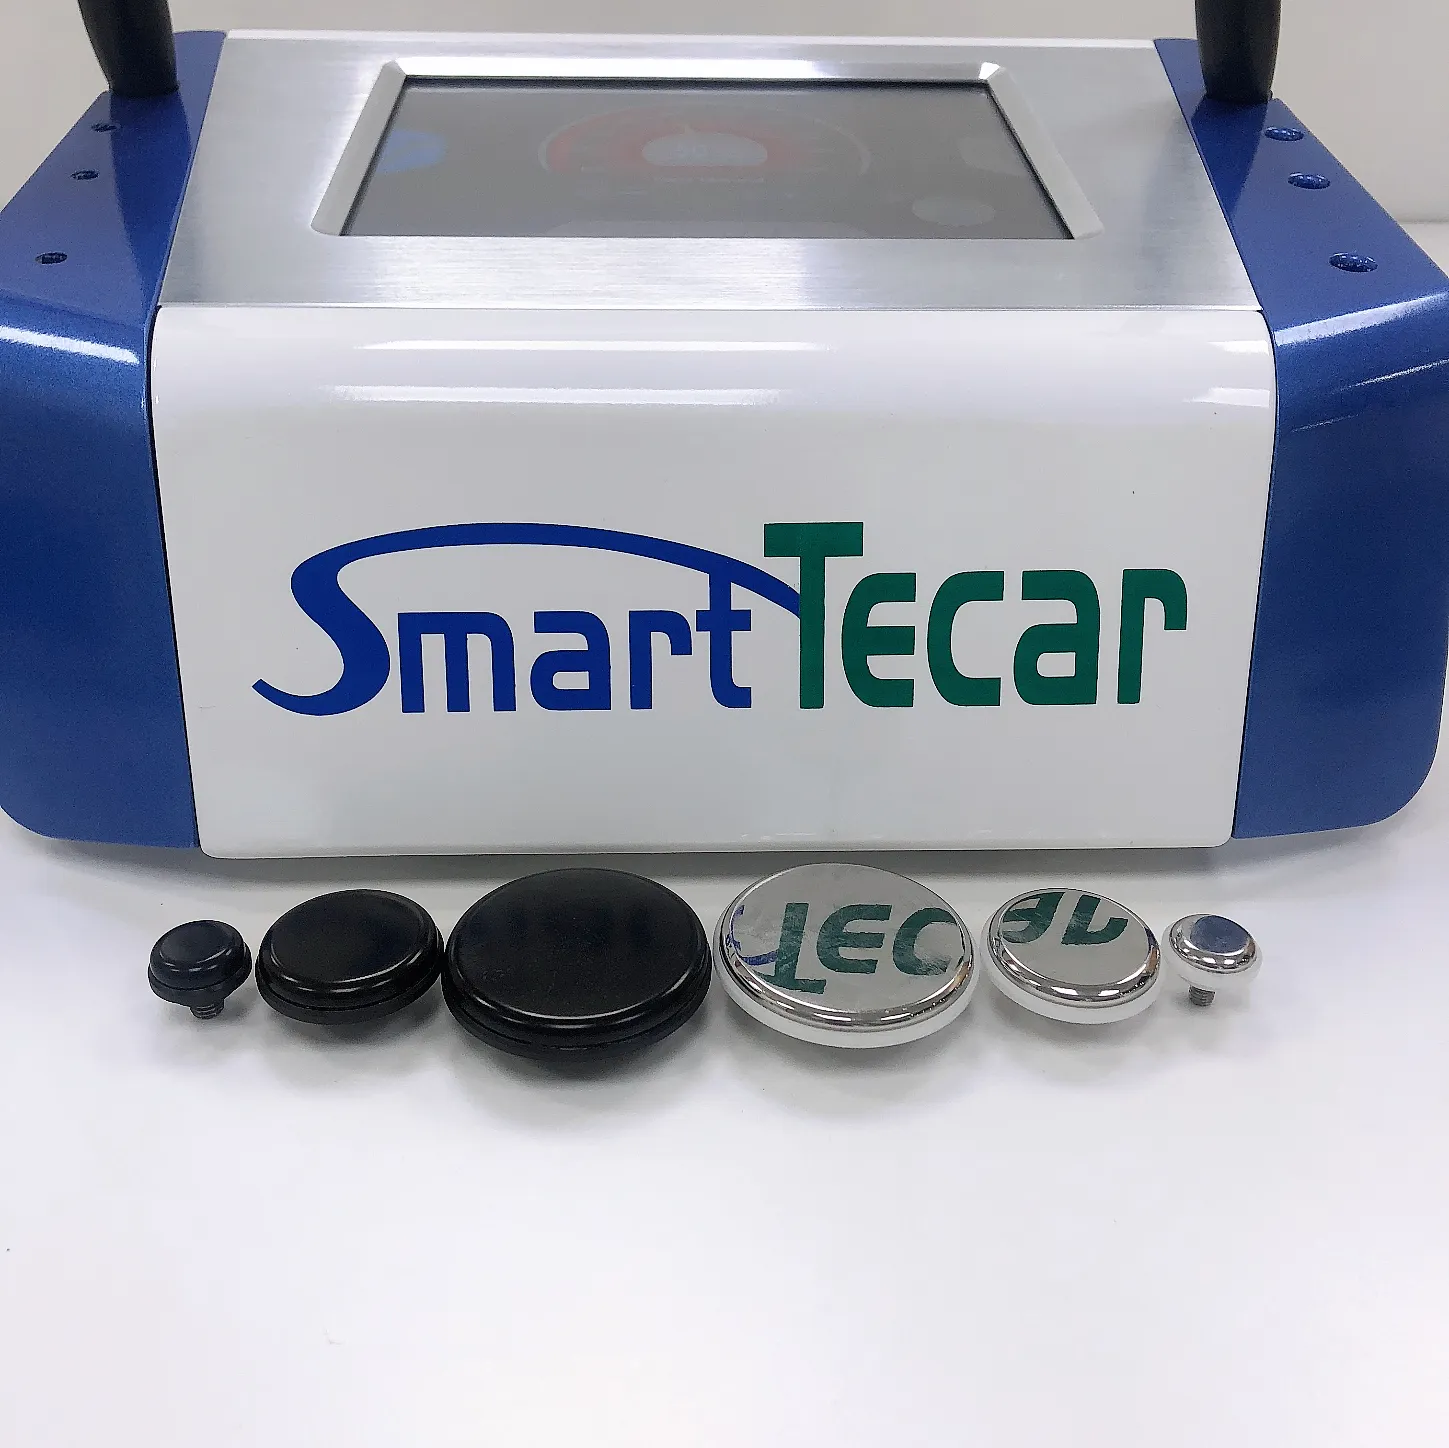 Portable therapeutic Tecar RF Beauty Equipment Therapy Machine for sport injuiry low back pain